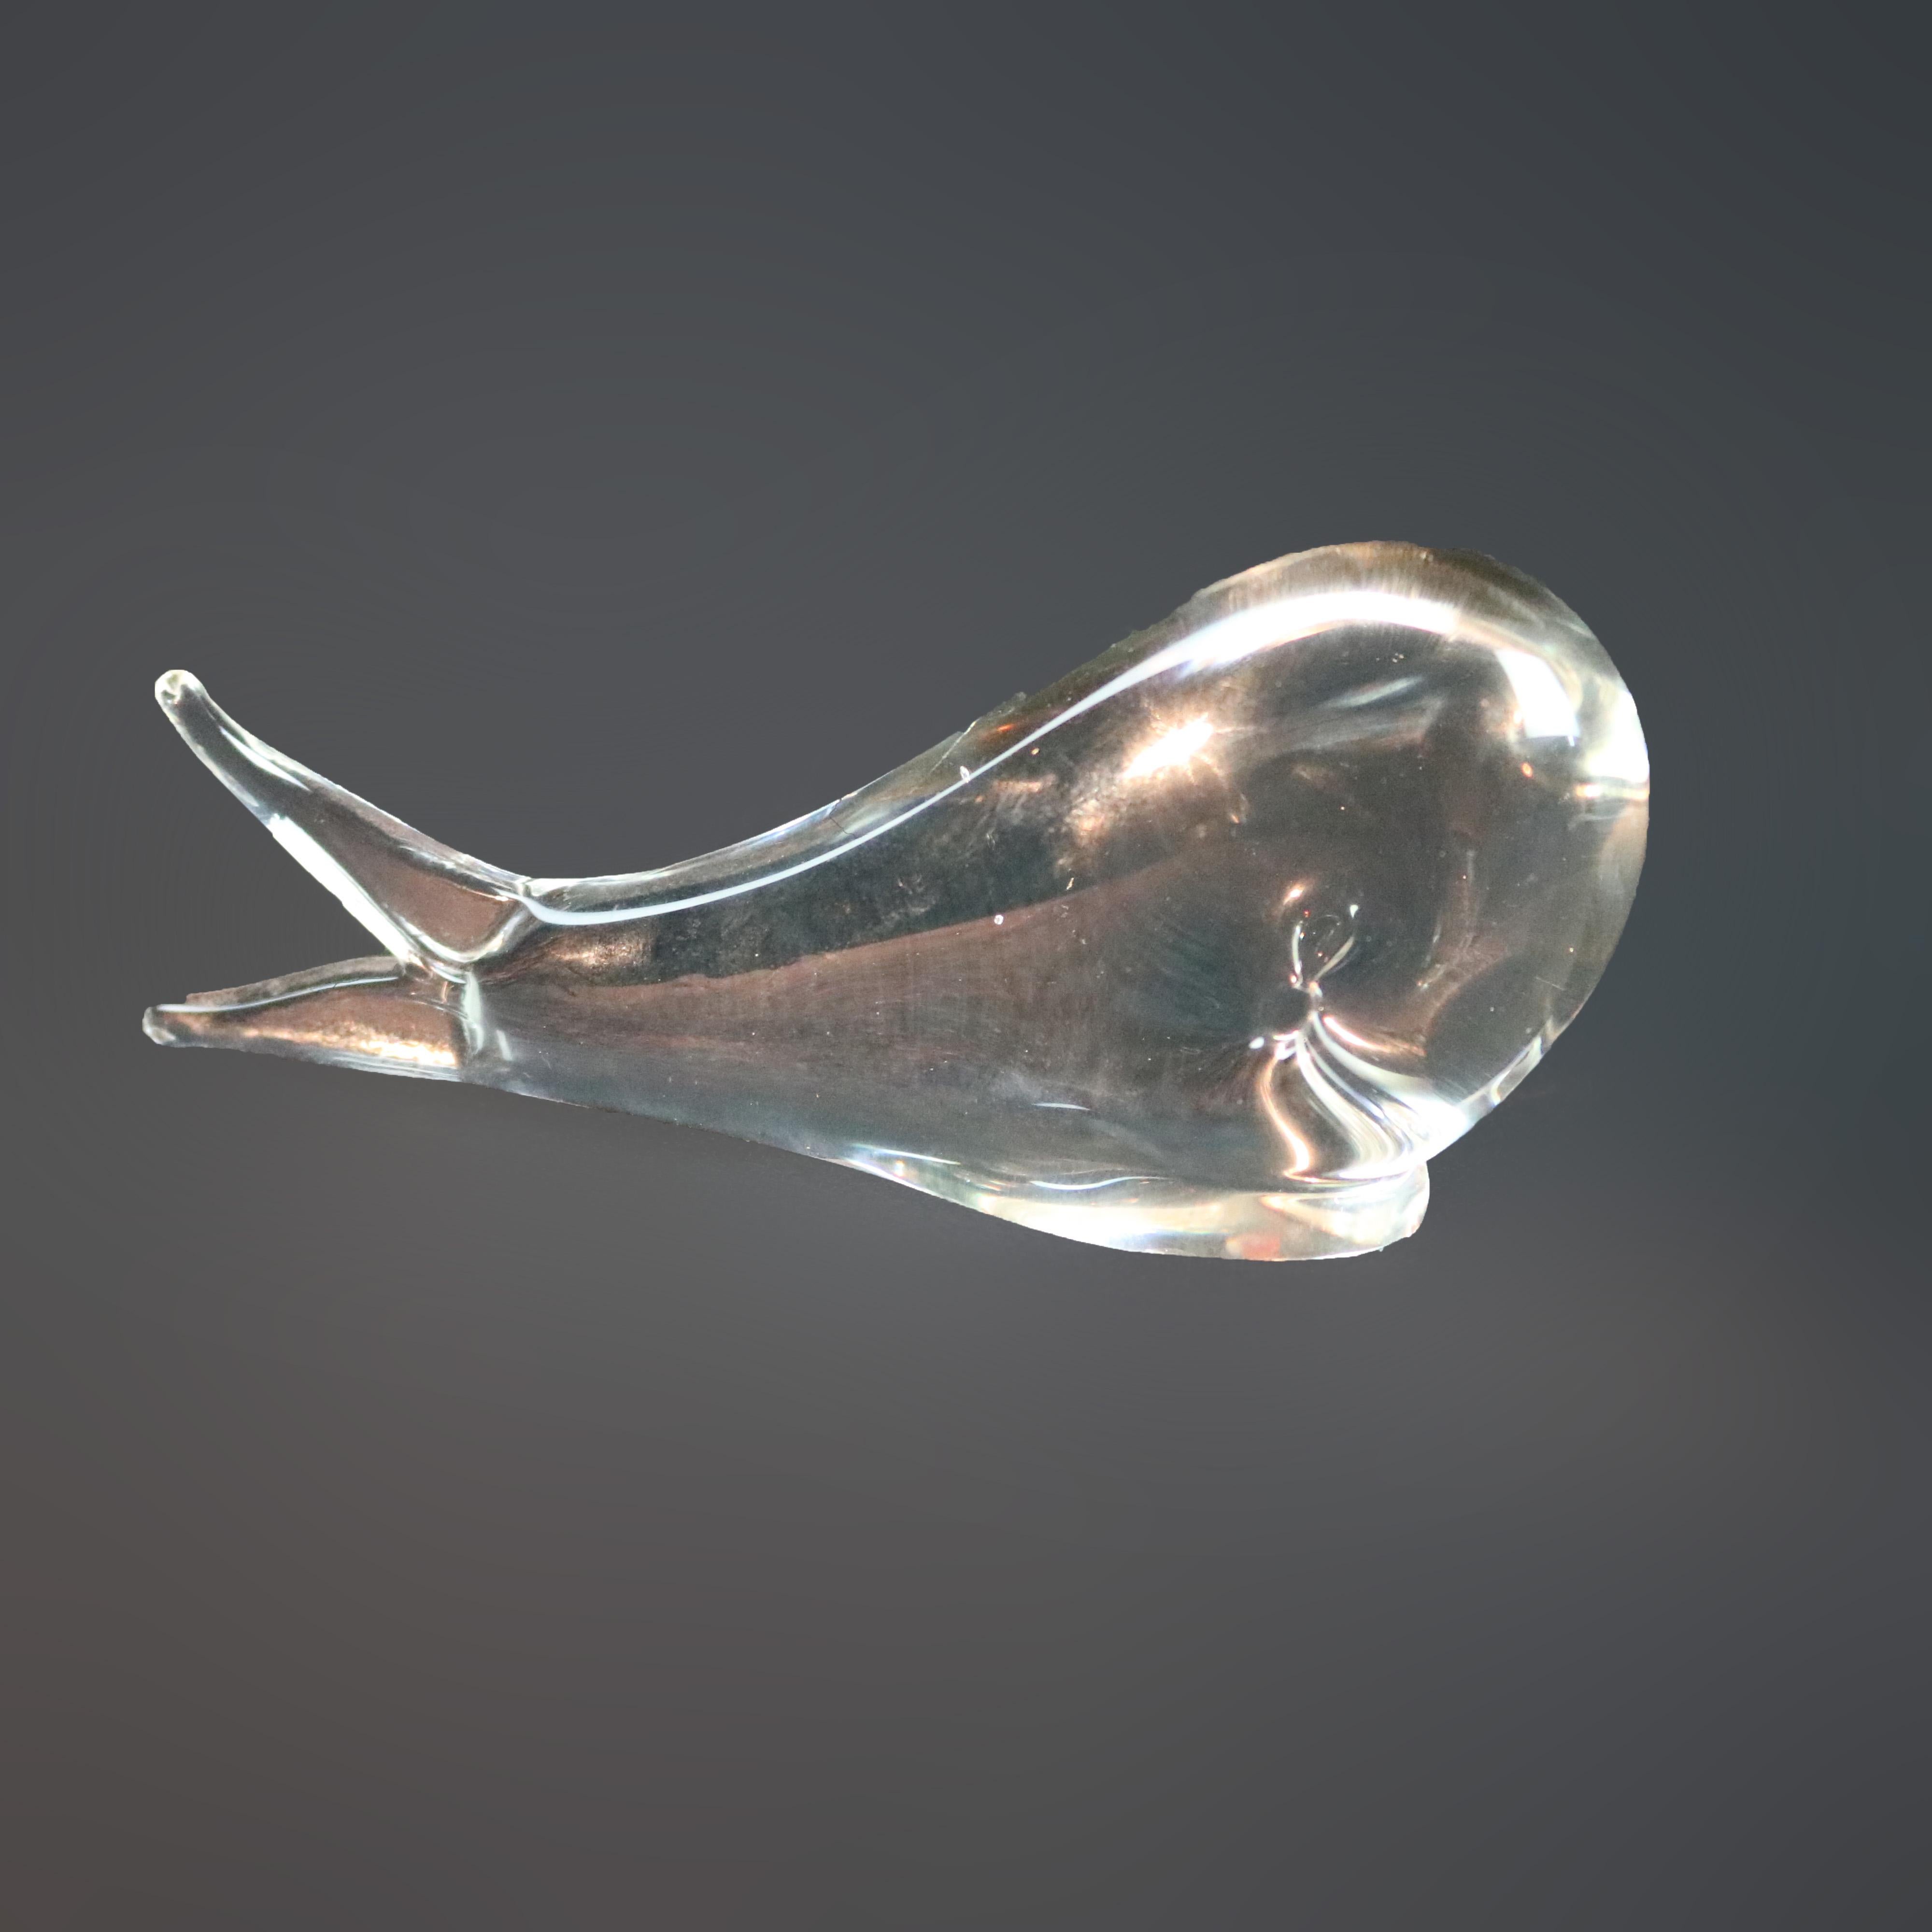 Midcentury Steuben figurative mouth blown crystal sculptural paperweight features colorless art glass in form of whale designed for Corning Museum of Glass, New York, NY, unsigned, 20th century.

Measures: 2.75